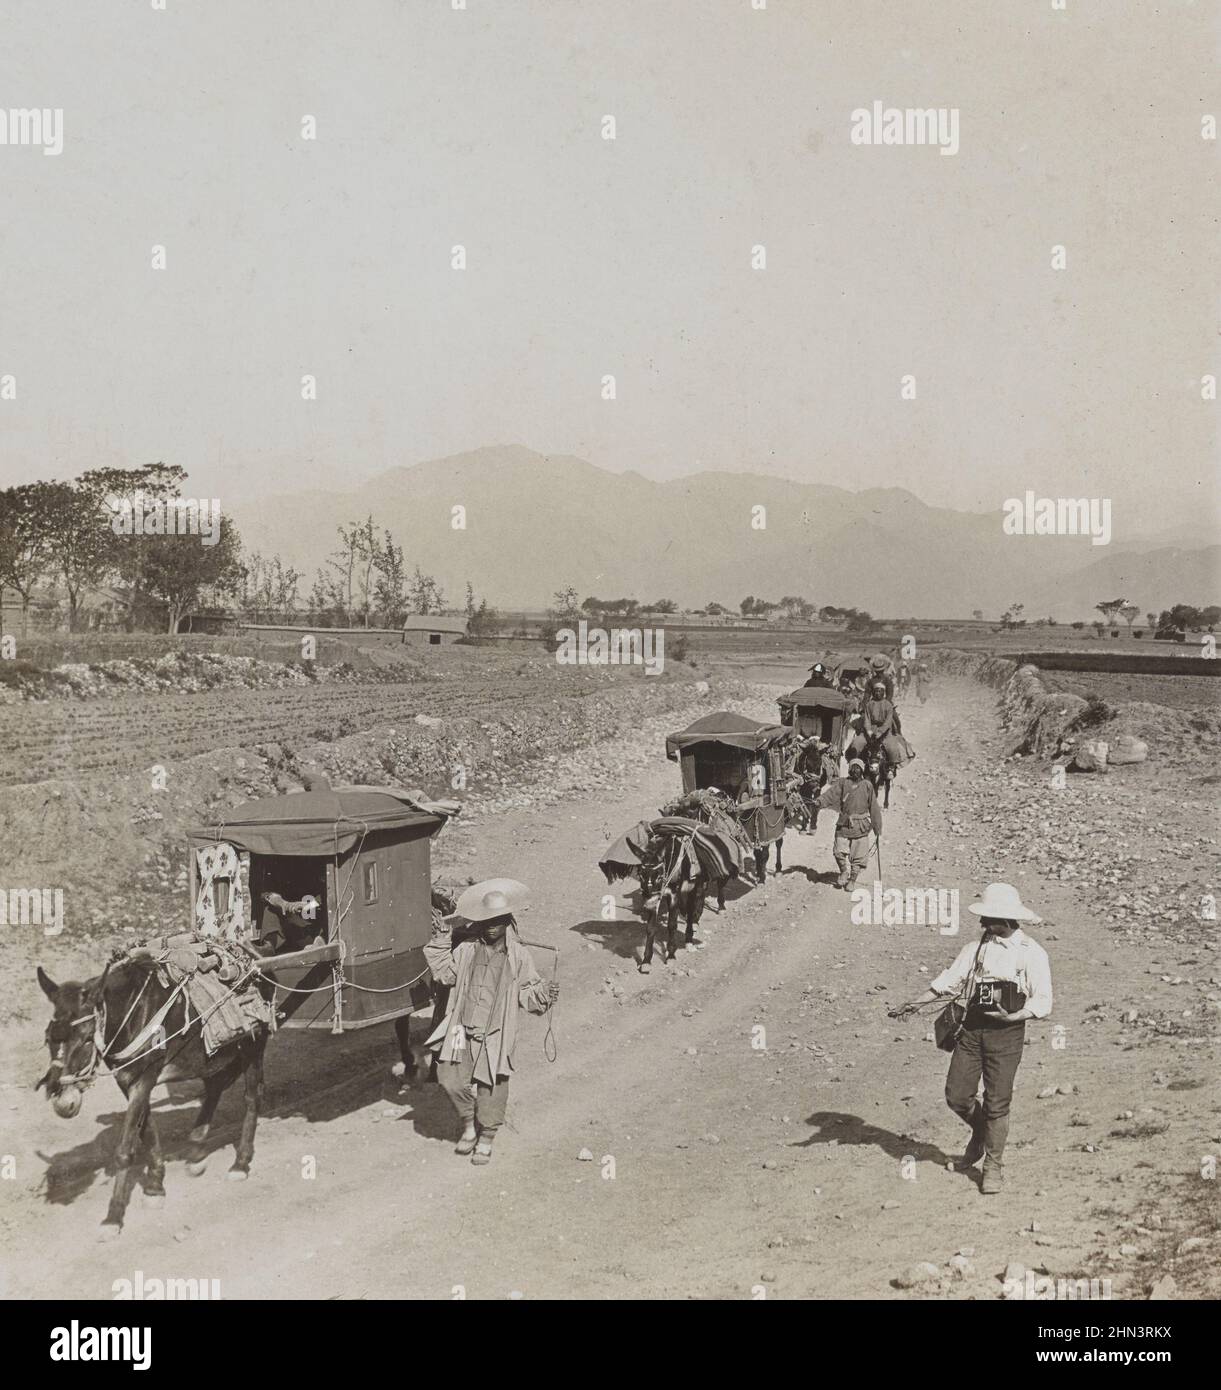 Vintage photo of Chinese men in traditional dress and donkey carts on the way to the tombs of the Ming Dynasty. North China. November 1902 Stock Photo